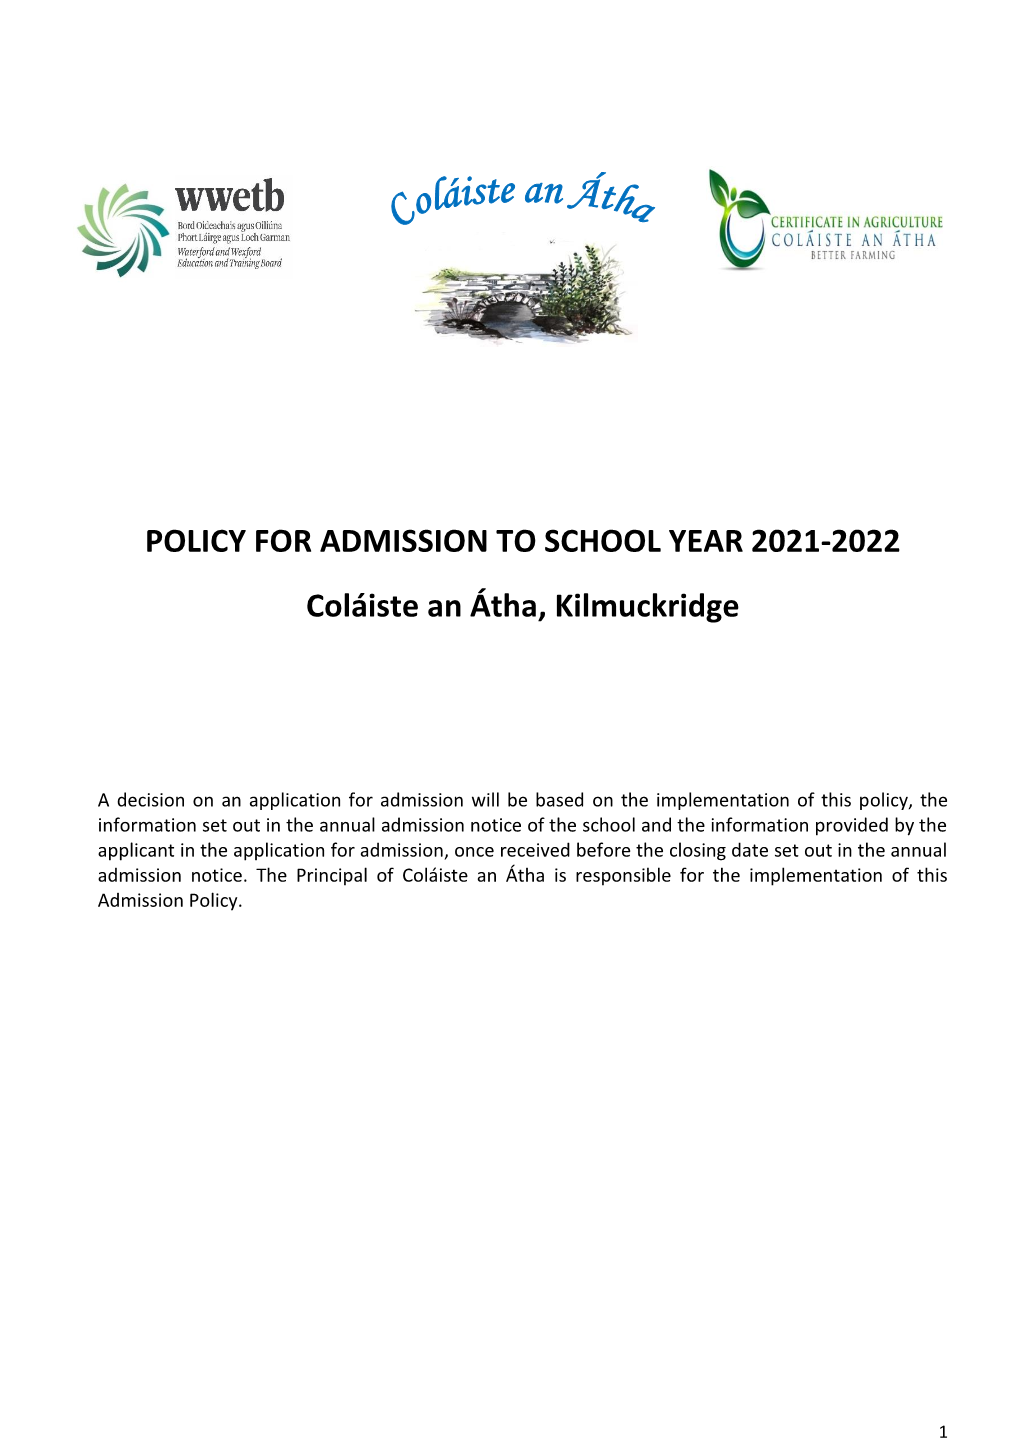 Admission Policy 2021/22